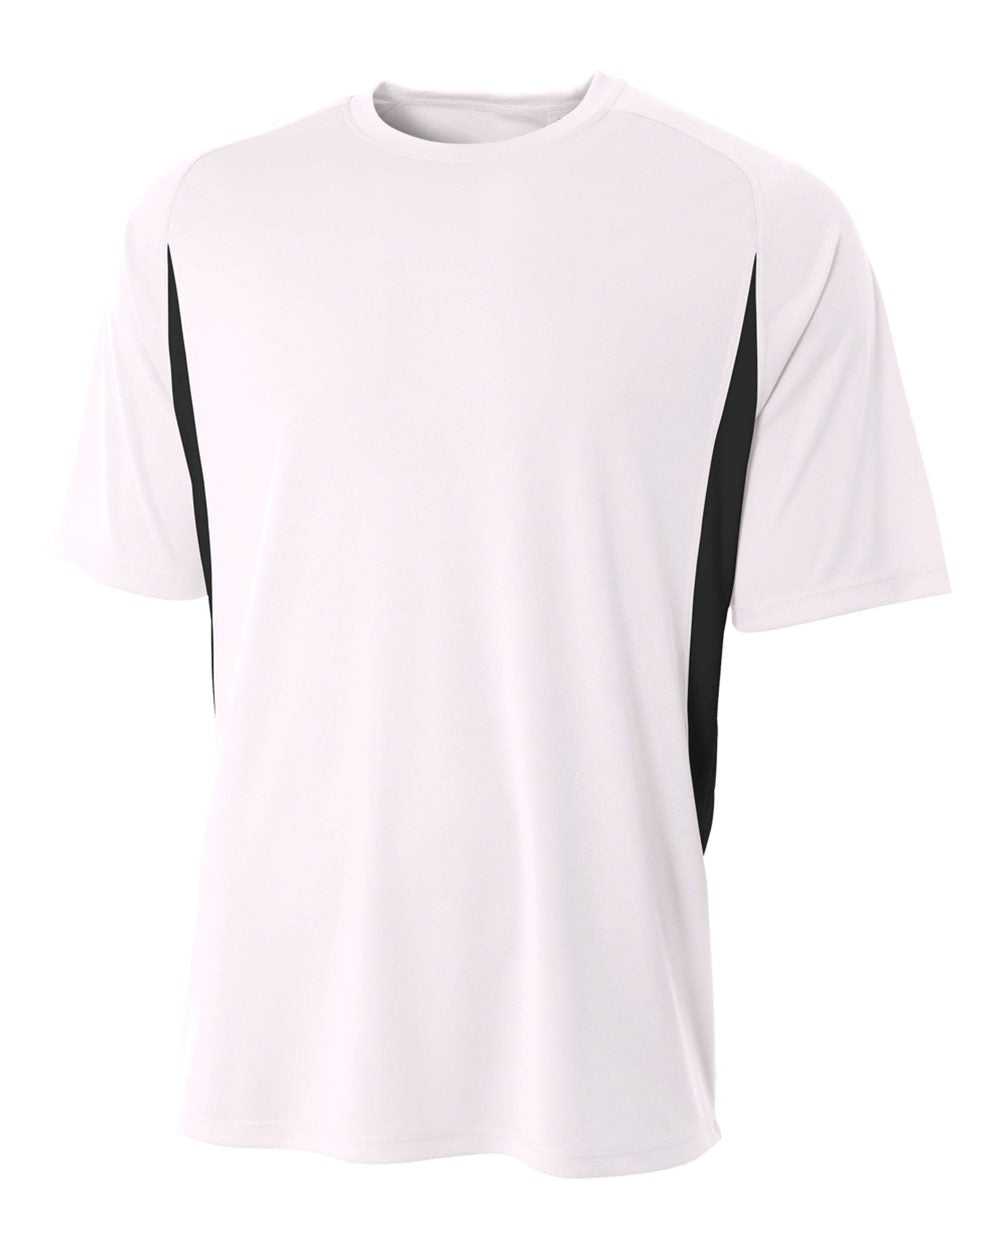 A4 N3181 Cooling Performance Color Blocked Short Sleeve Crew - White Black - HIT a Double